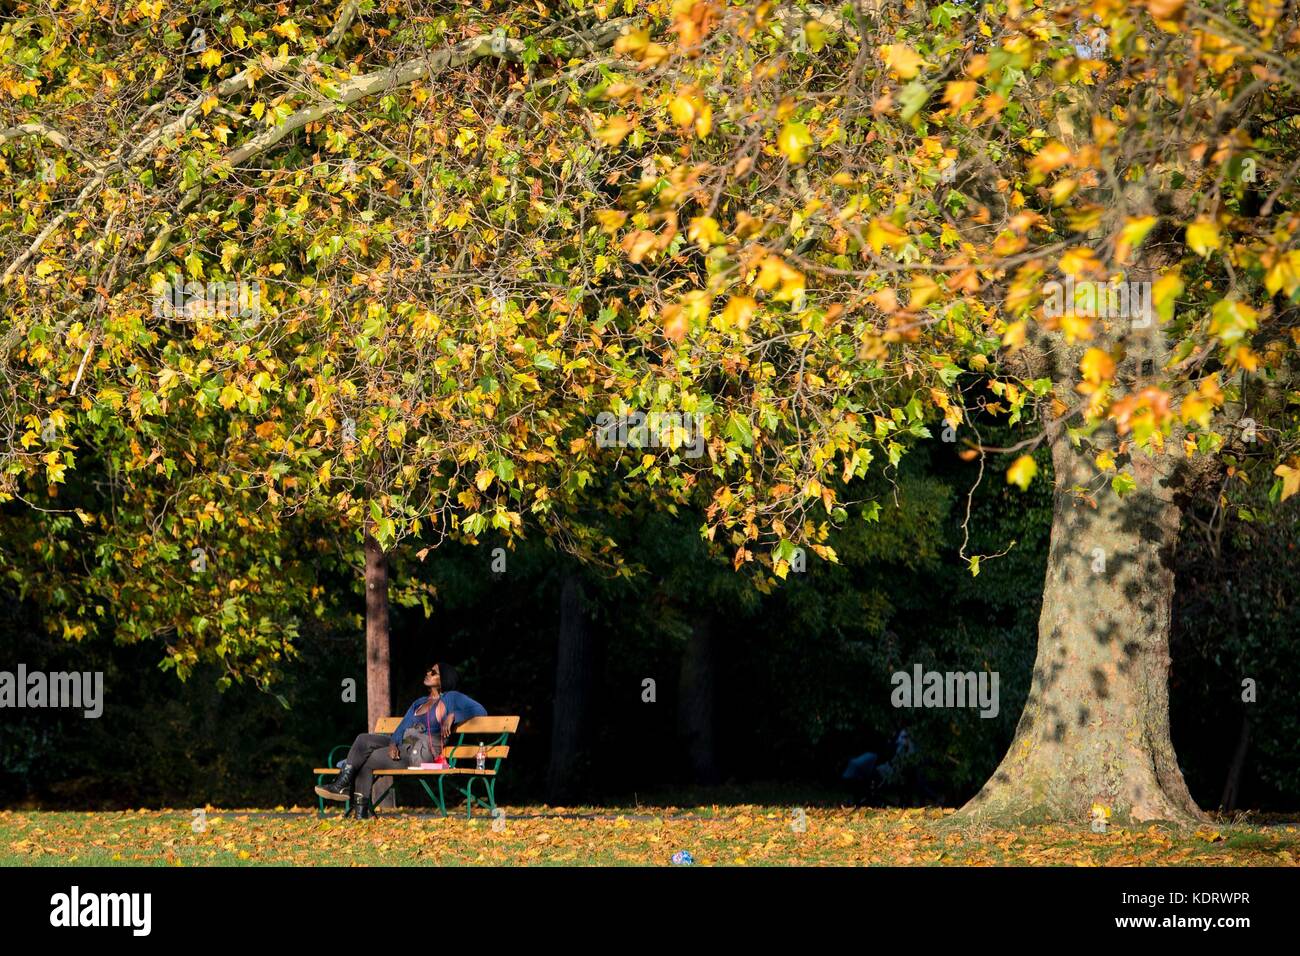 A woman enjoys the warm weather in Hilly Fields Park, in south east London, as parts of the UK enjoyed unseasonably warm weather as Hurricane Ophelia approaches the UK and Ireland. Stock Photo